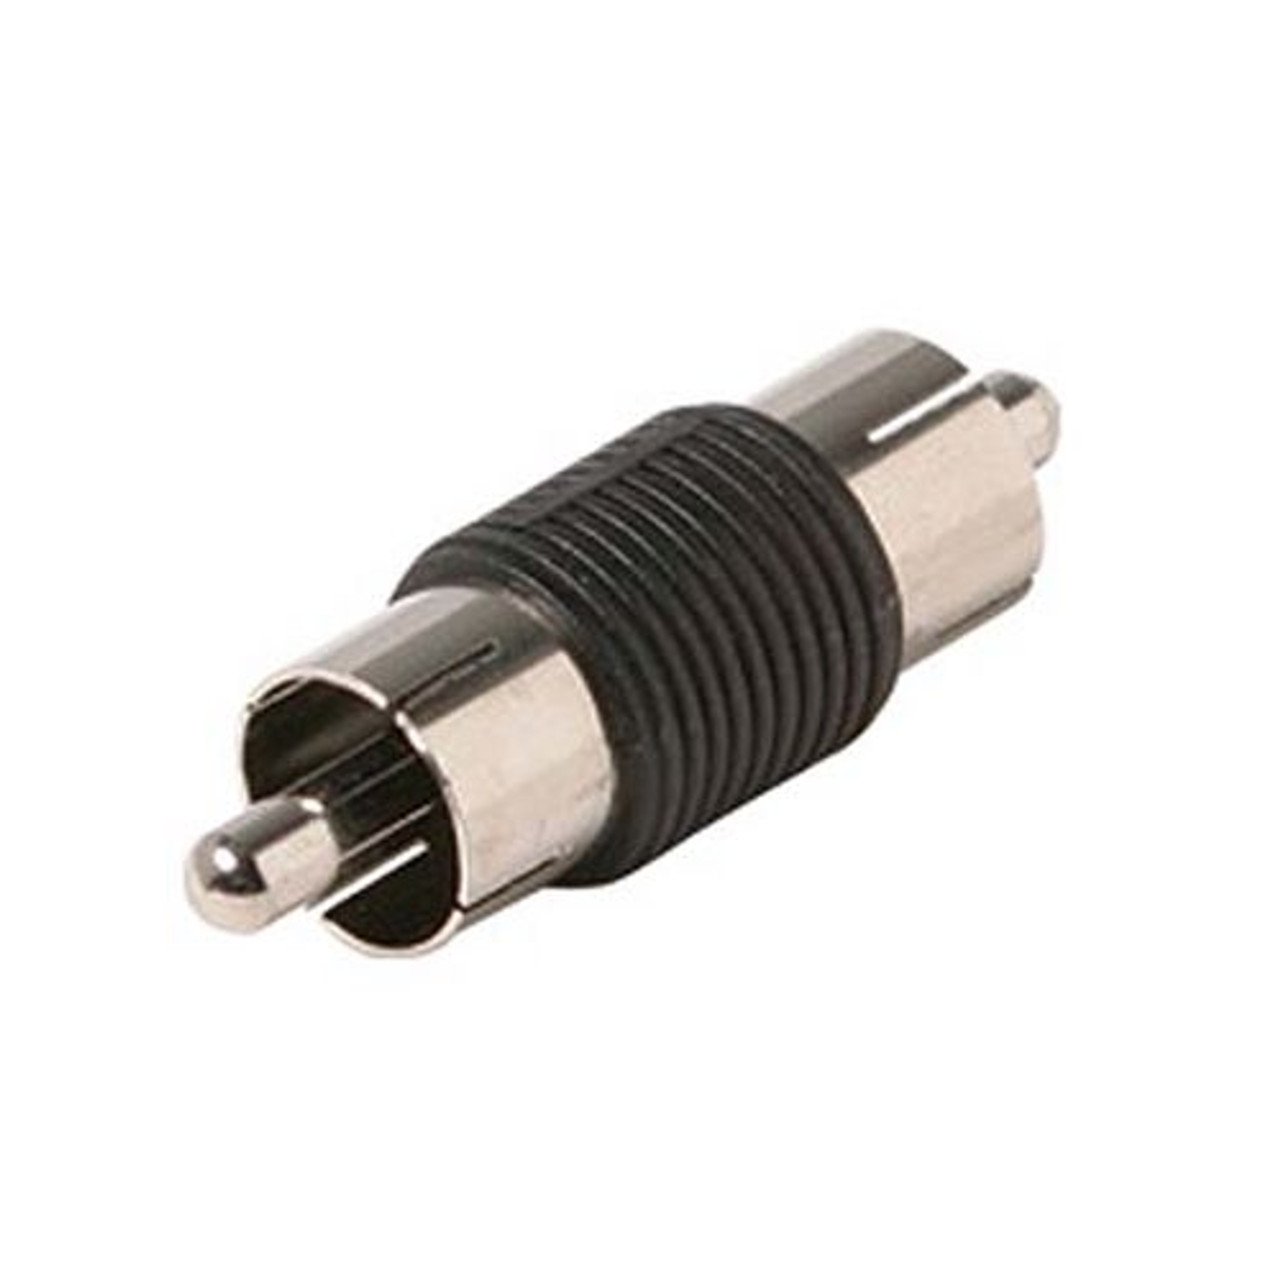 Steren 251-110 RCA AV Cable Coupler Male to Male 2 RCA Female Cables Composite Video Adapter Jack Double In-Line Splice 10 Pack Signal Cable Joint Extender, Part # 25111010